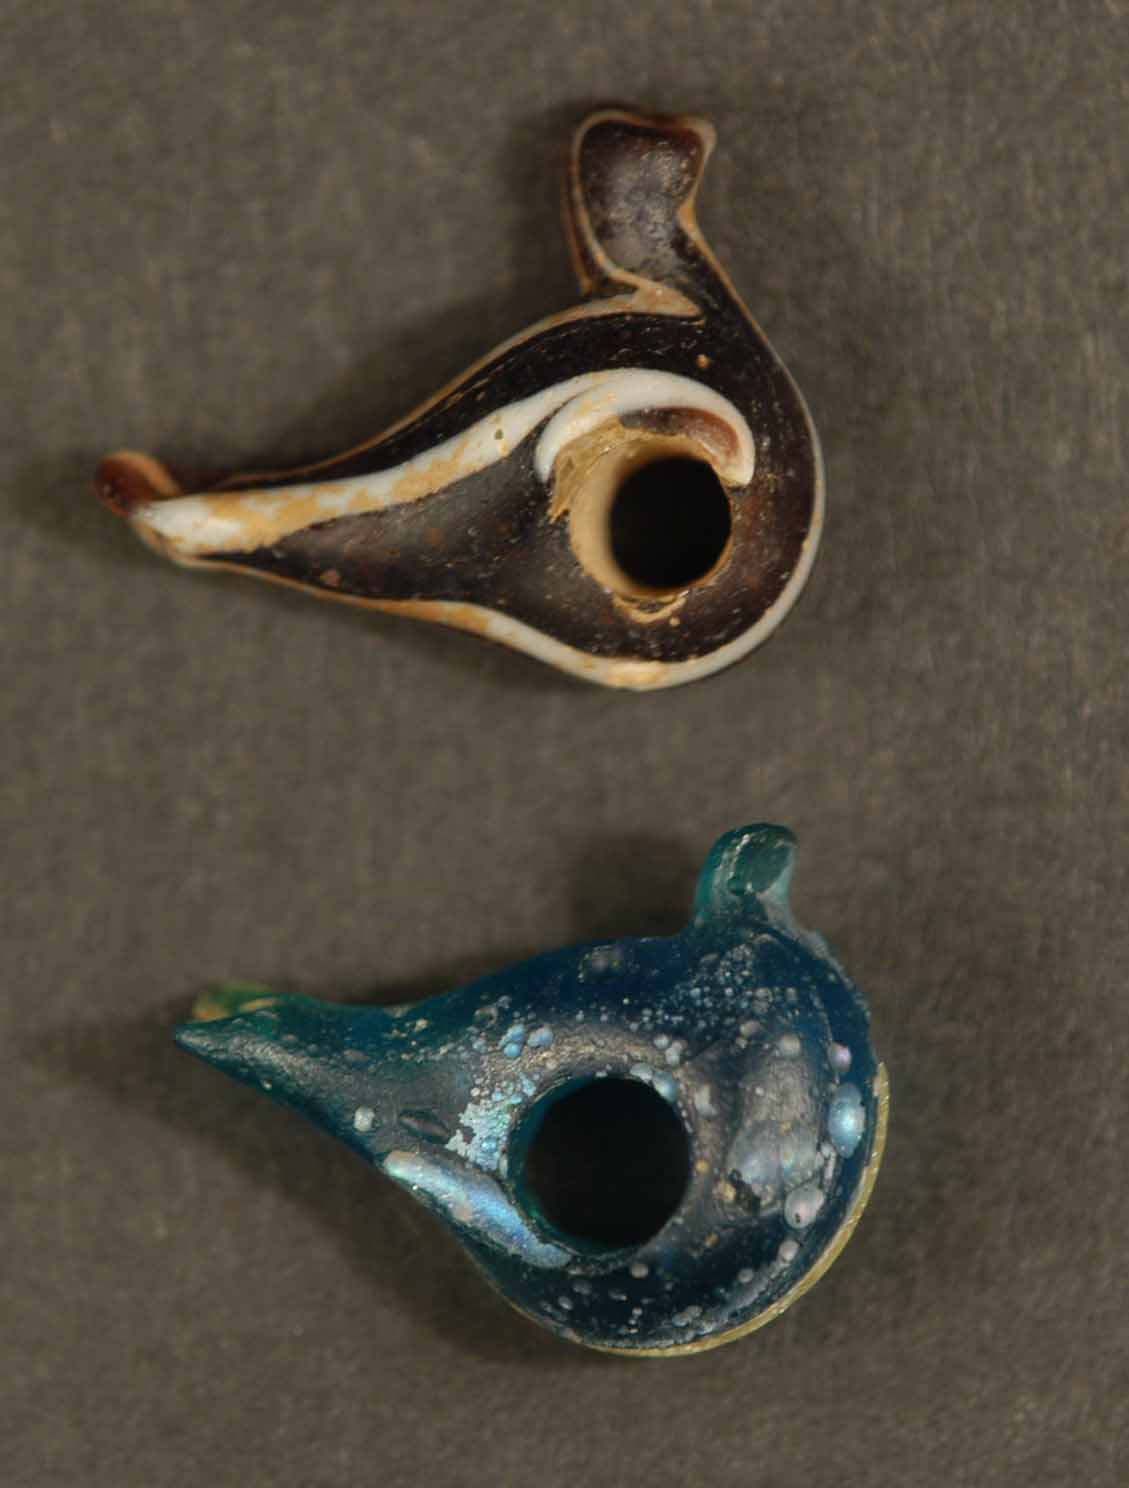 8_iron_age_II_1000_-_586_BC.Trail_decorated_Bird_beads._Europ_probably_Italy._8th-7th_BC._UP_16.55mm-13.50mm-7.30mm_._Down_16.40-11.20-6.70mm_A.jpg (102.4 KB)